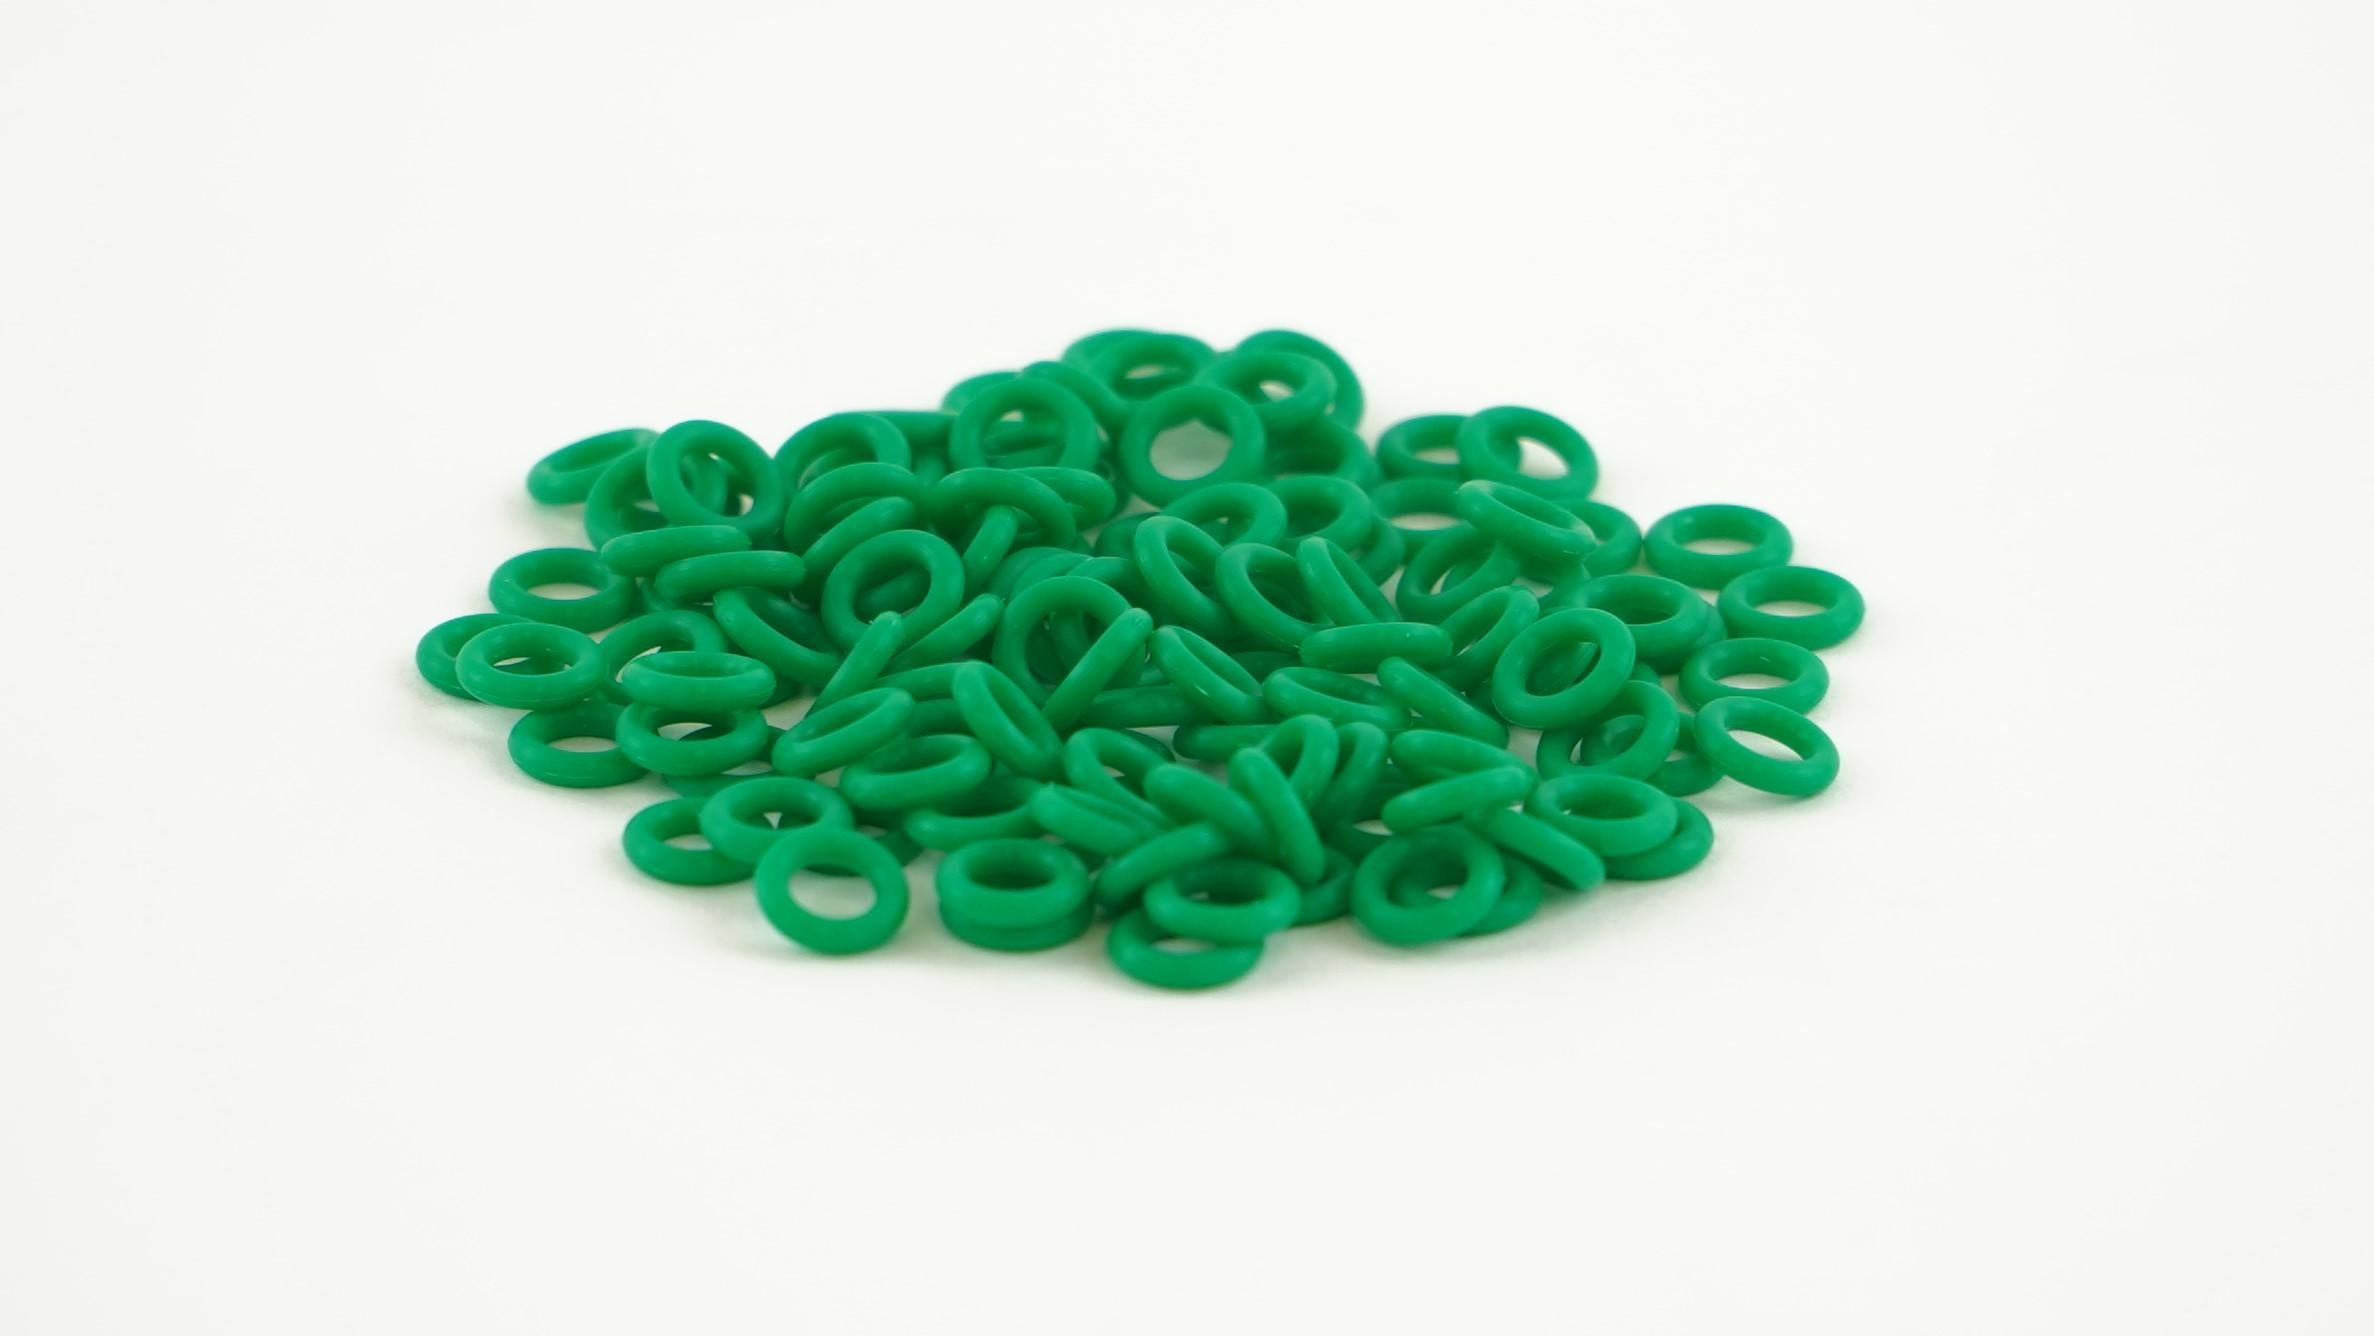 MK Pro Rings Silicone Switch Dampening O-rings 50A 2.0mm (120 Pack) MK3CFHKZQS |0|